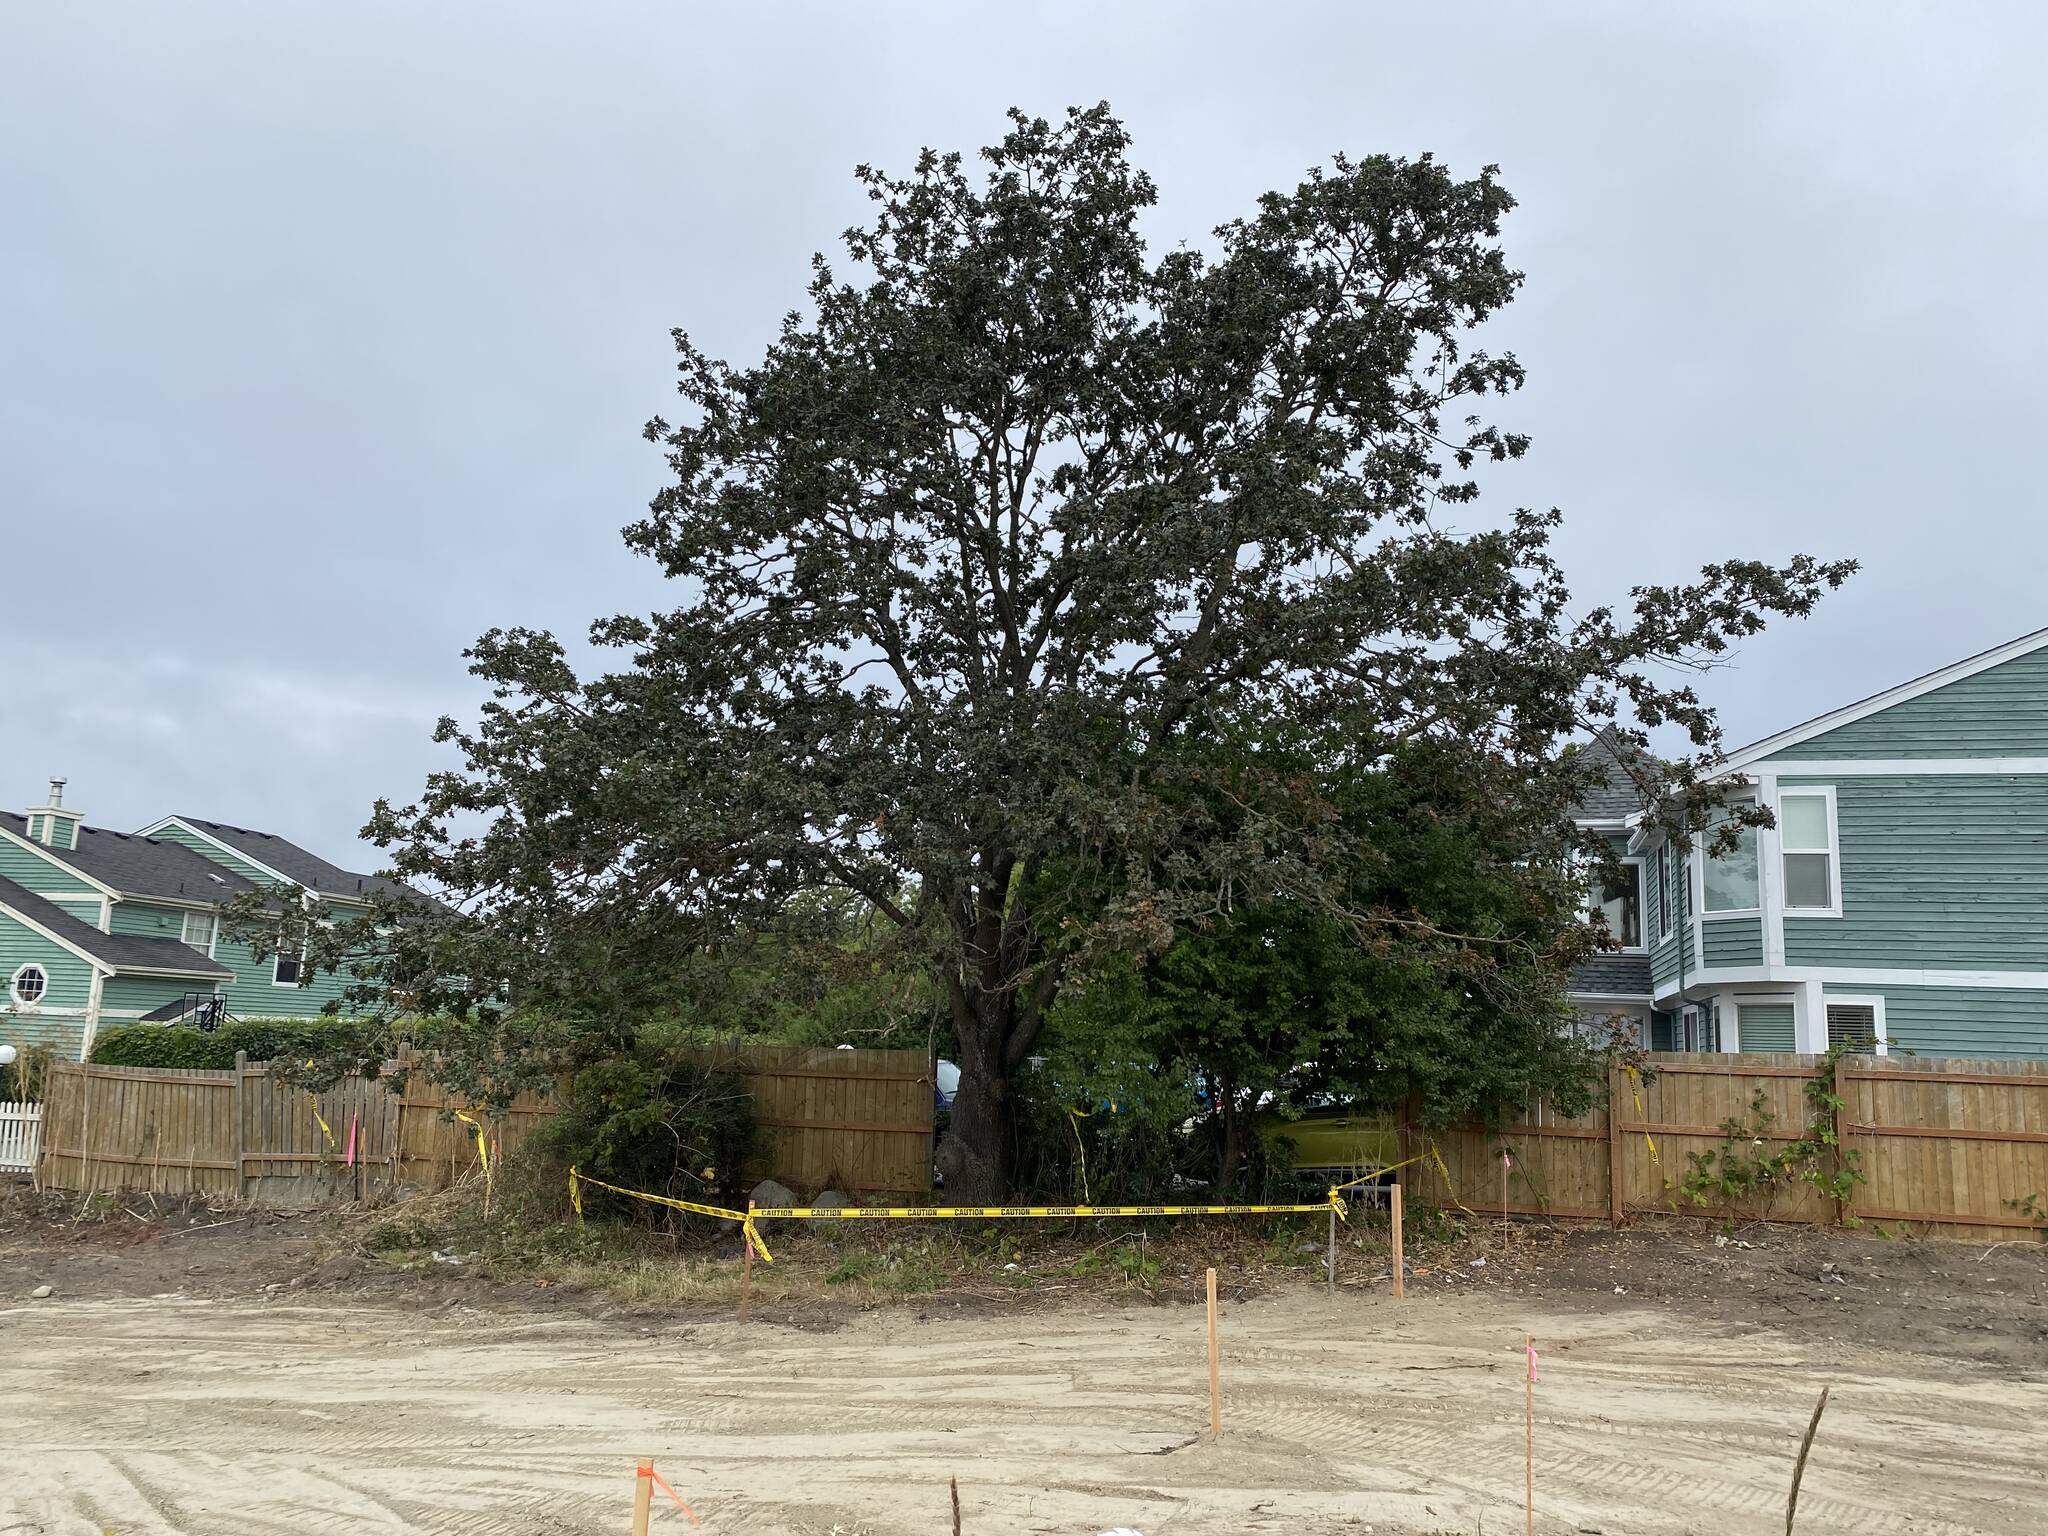 Photo provided
A Garry oak tree on Ely street that was damaged by construction in August 2022.